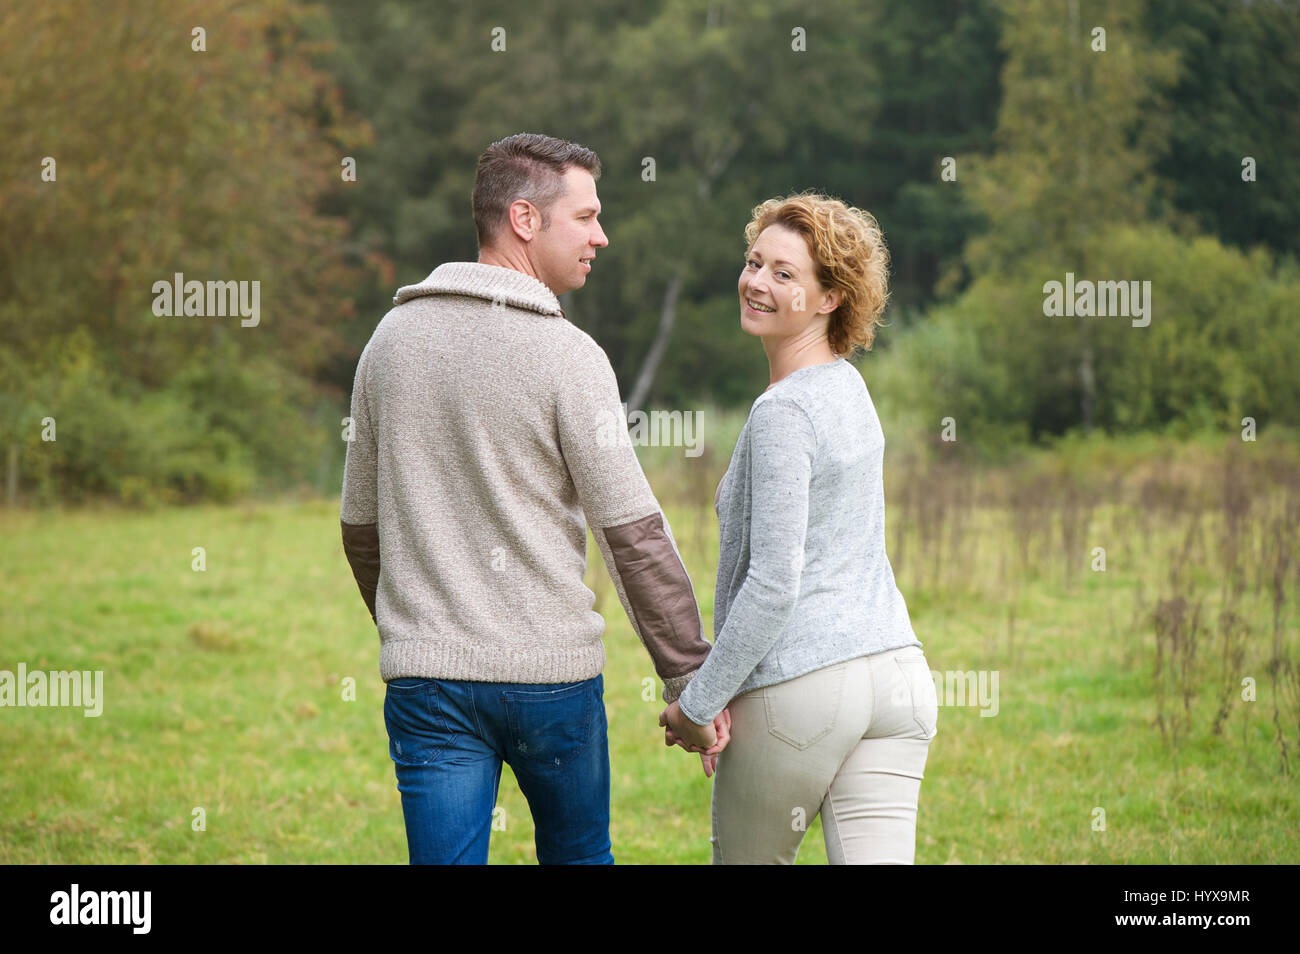 Portrait of a happy couple walking in the countryside Stock Photo